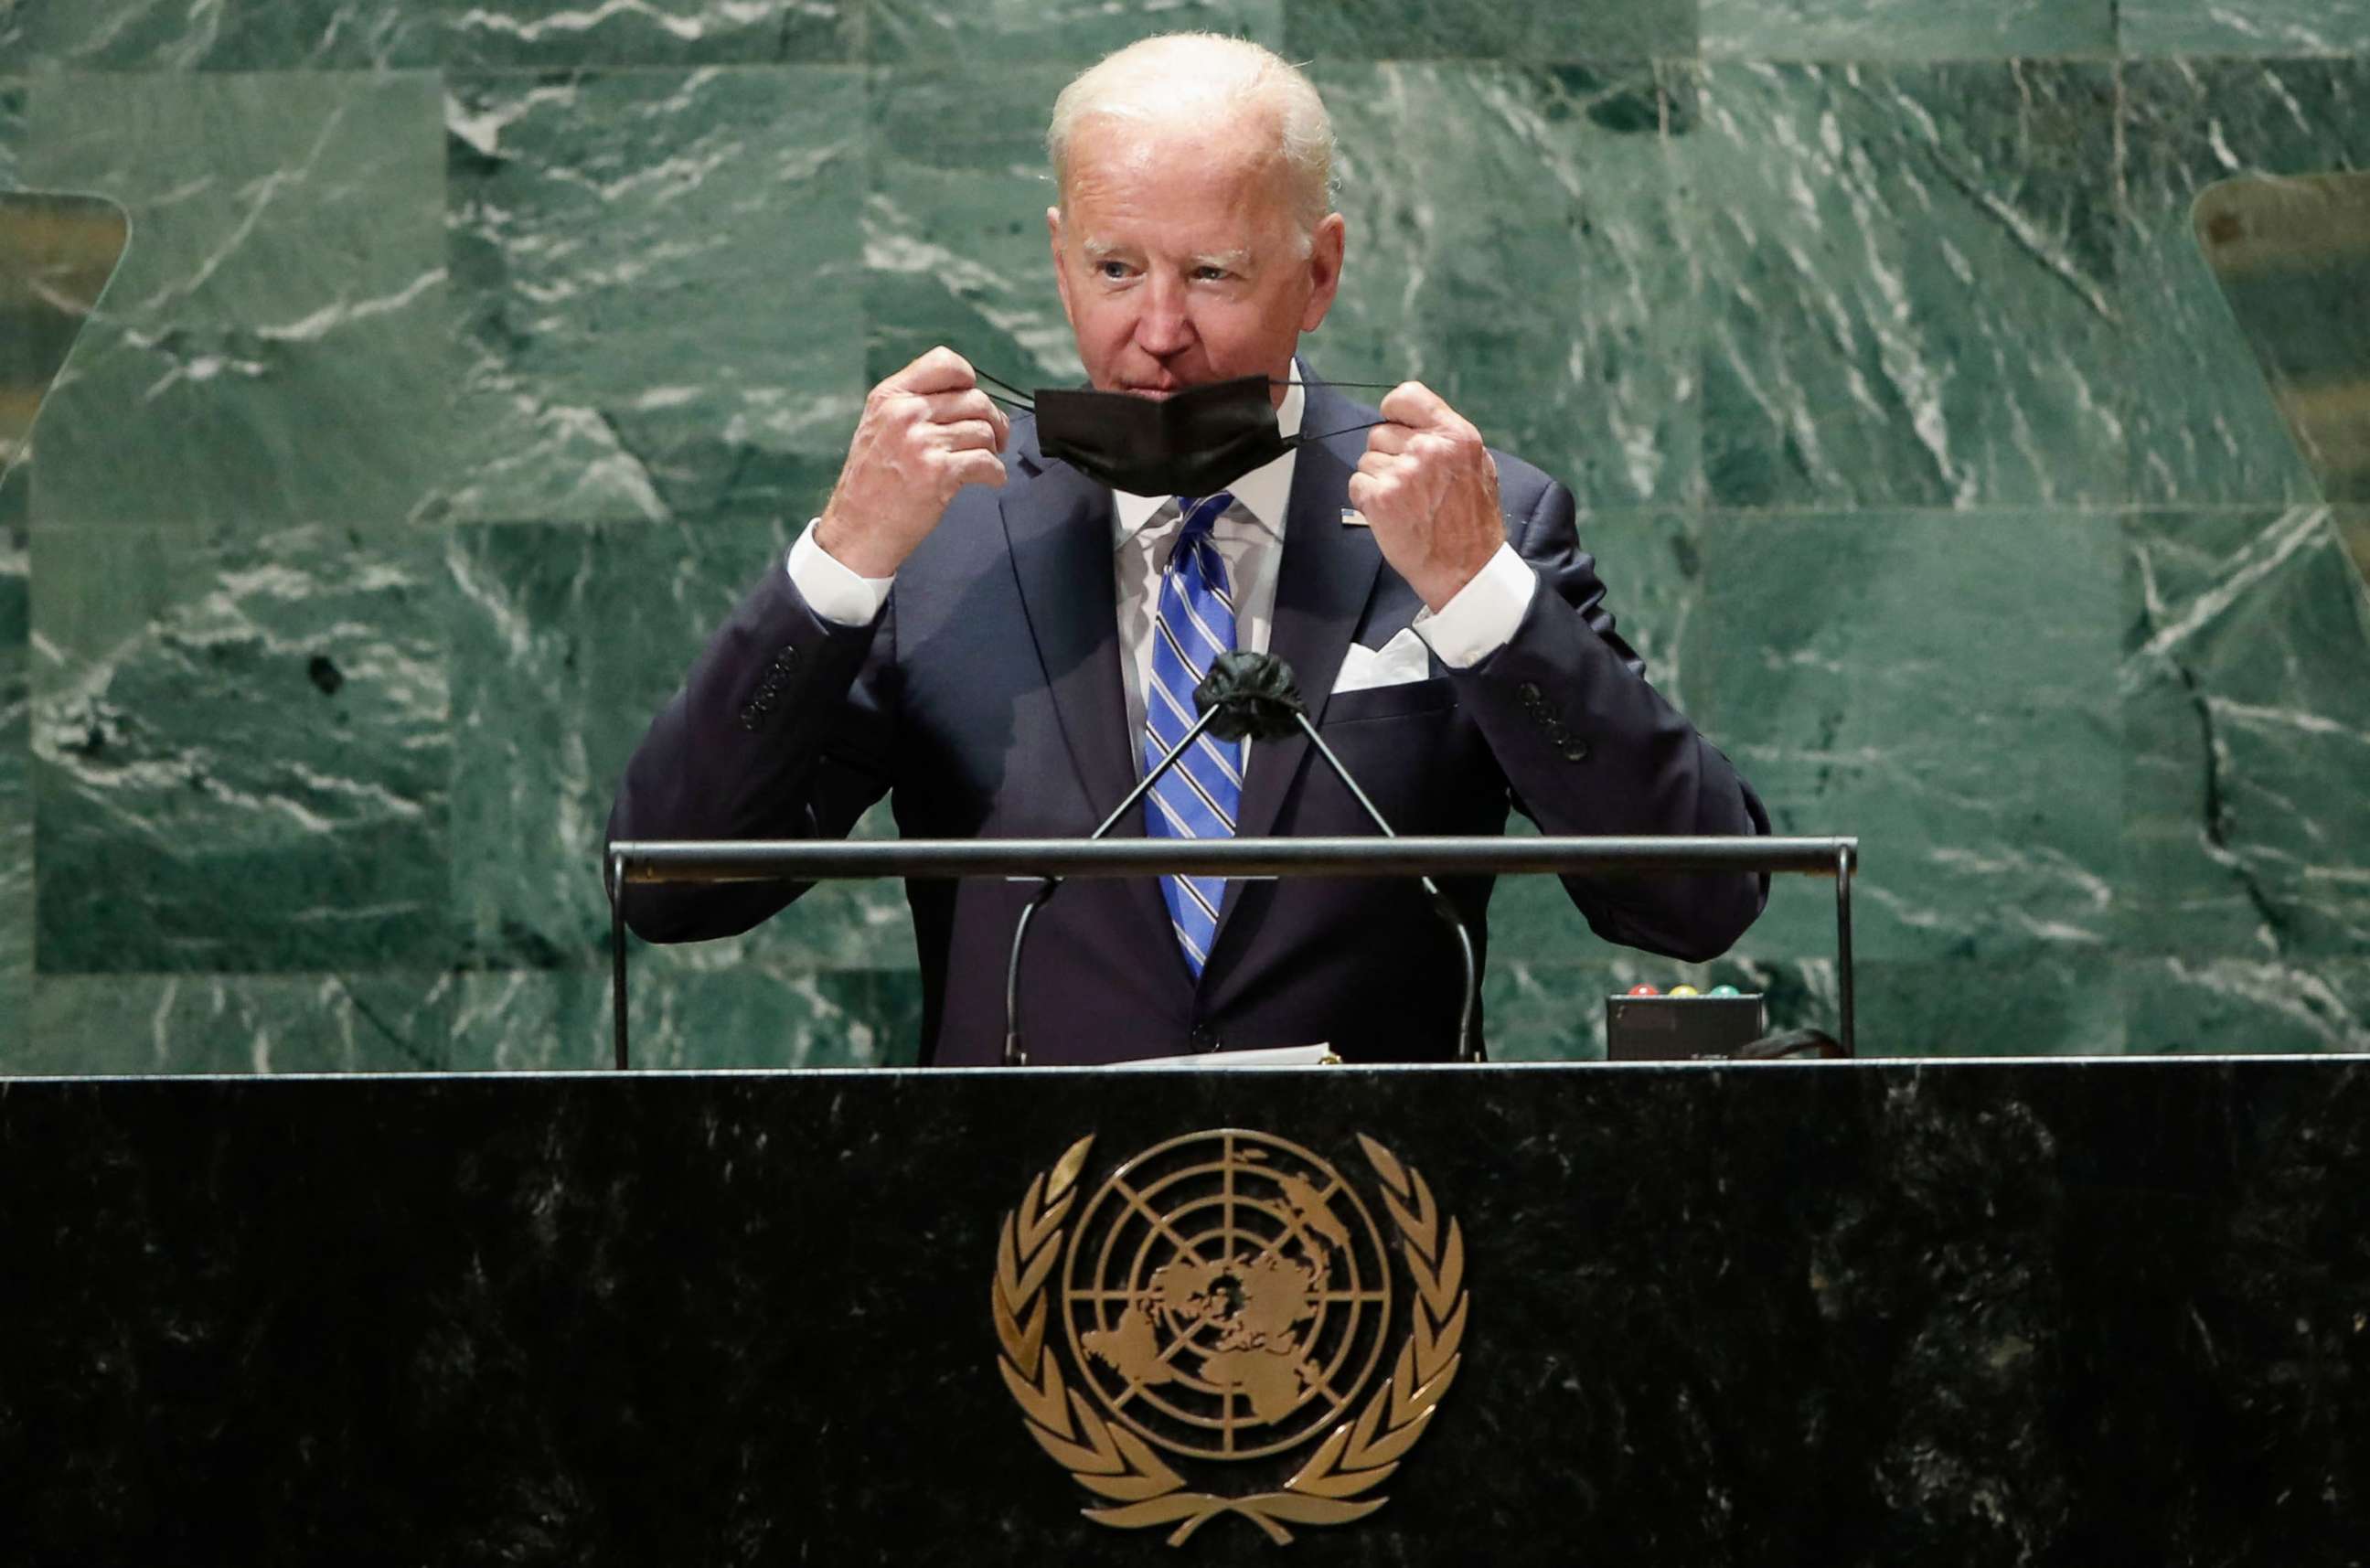 PHOTO: President Joe Biden takes off his protective face mask before speaking at the 76th Session of the UN General Assembly, Sept. 21, 2021, in New York.